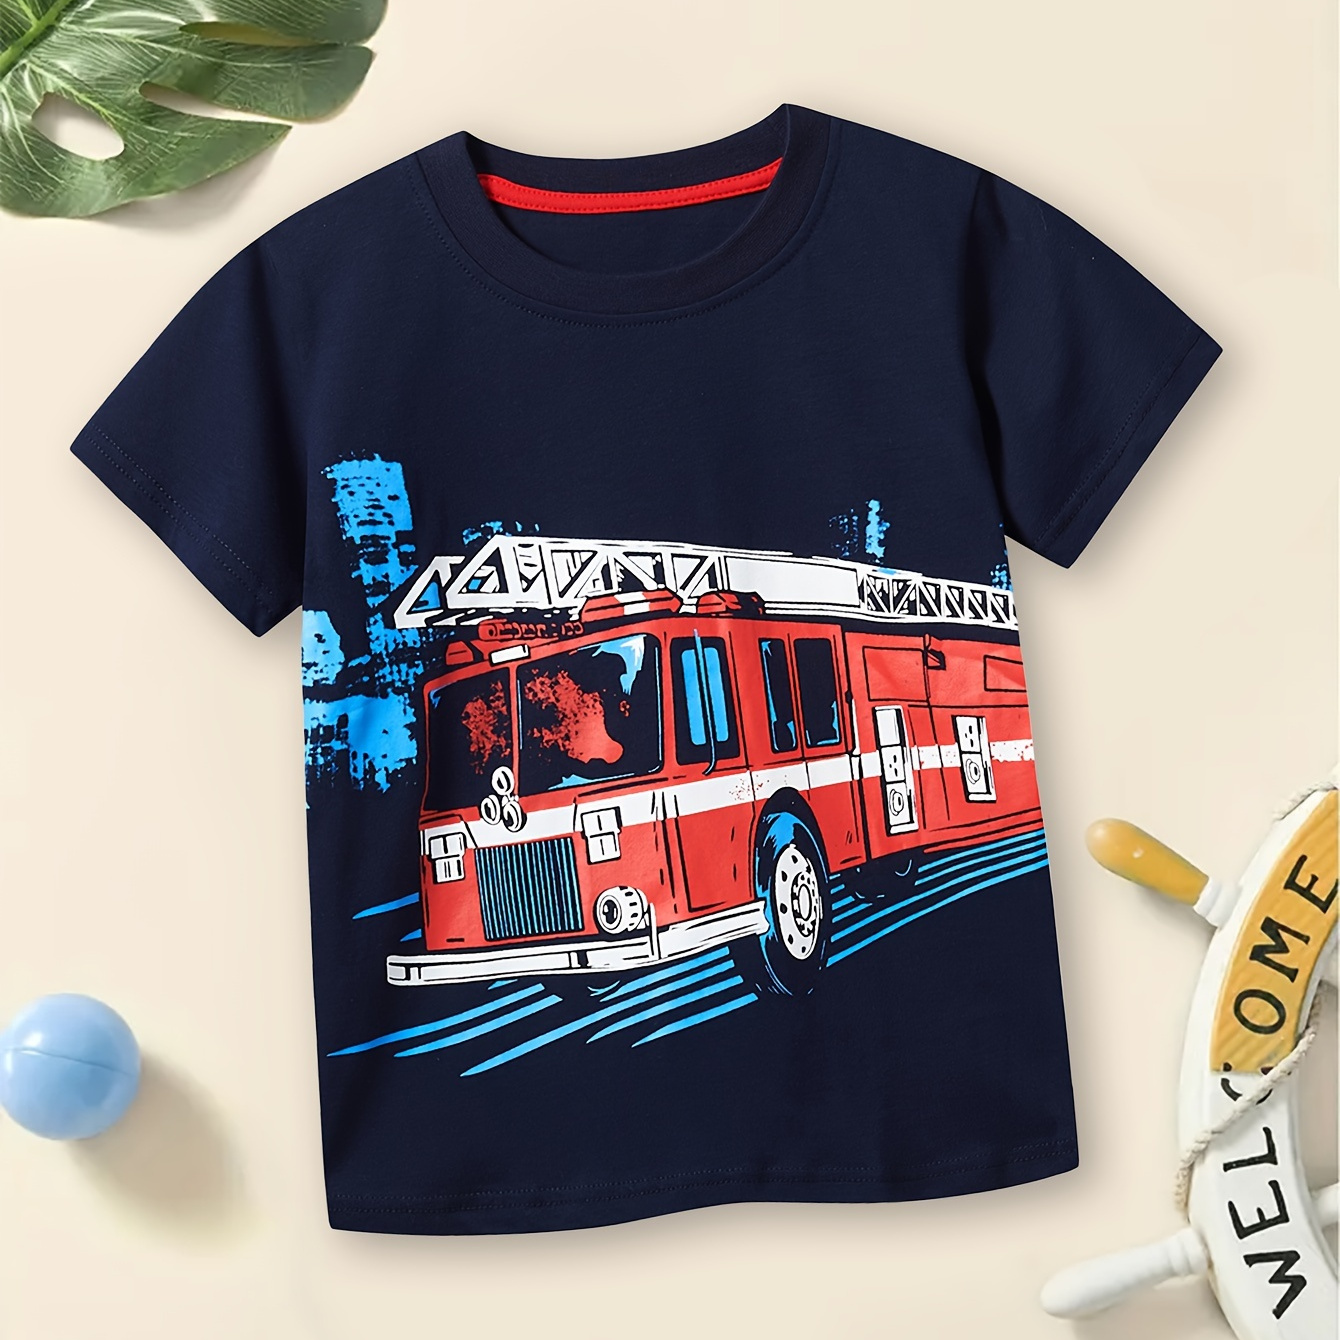 

Fire Truck Graphic Round Neck Cotton T-shirt Tees Tops Casual Soft Comfortable Boys And Girls Summer Clothes